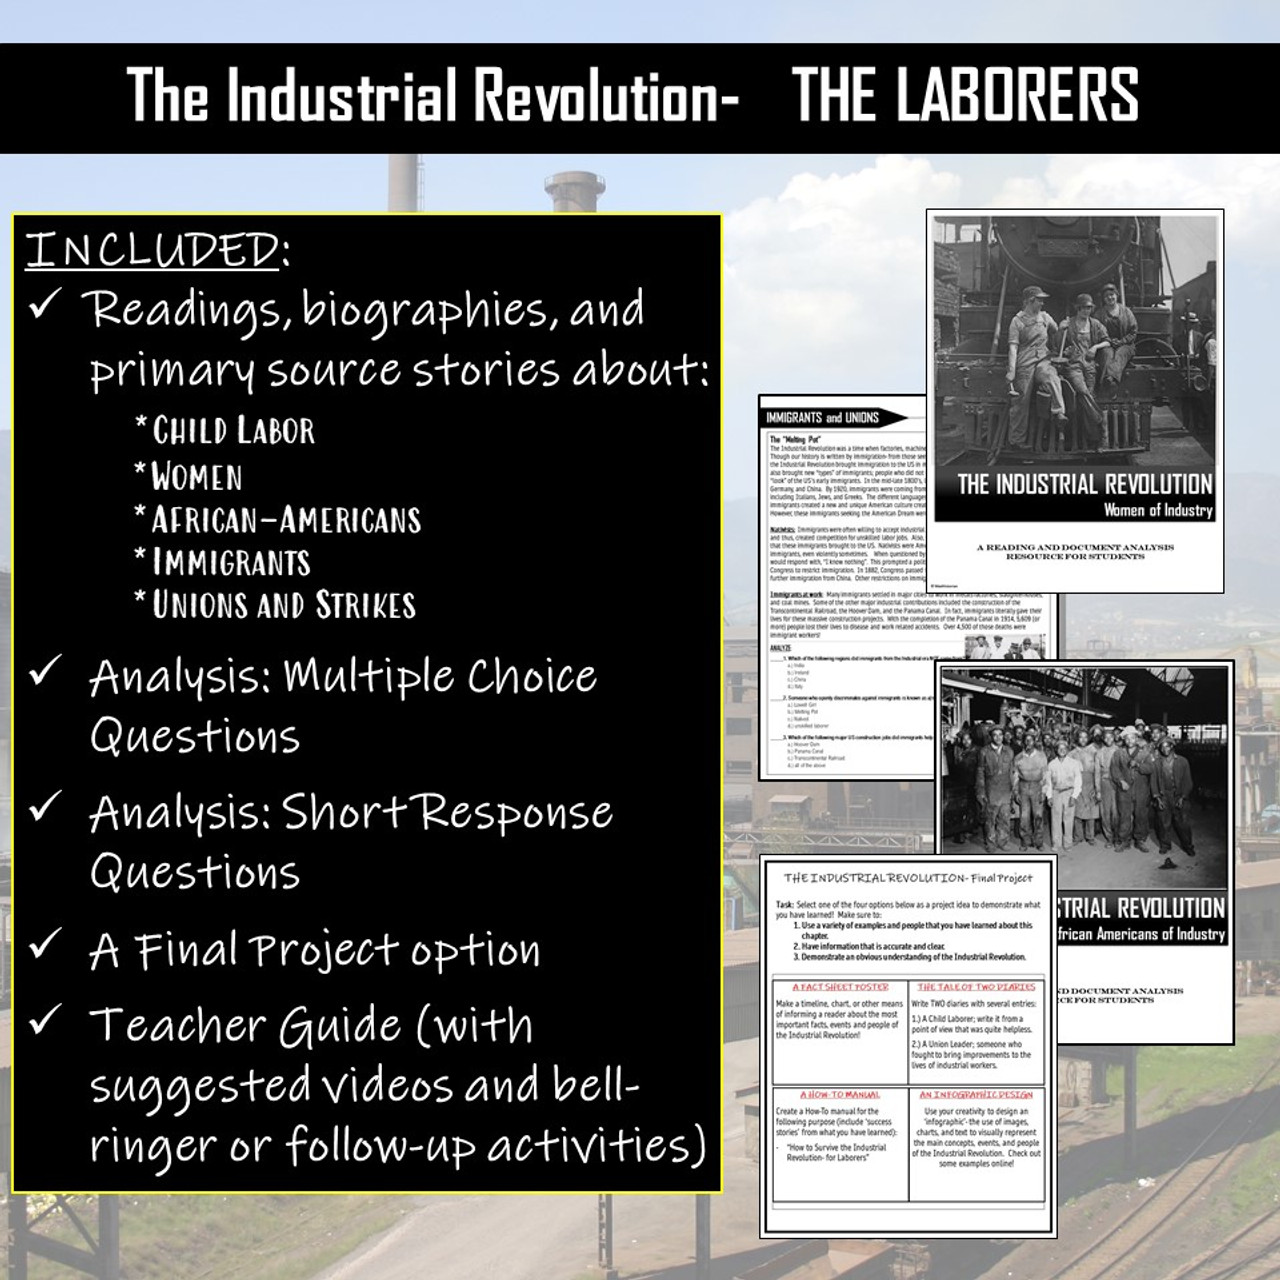 The Industrial Revolution Laborers: Reading Comprehension Unit Lessons!